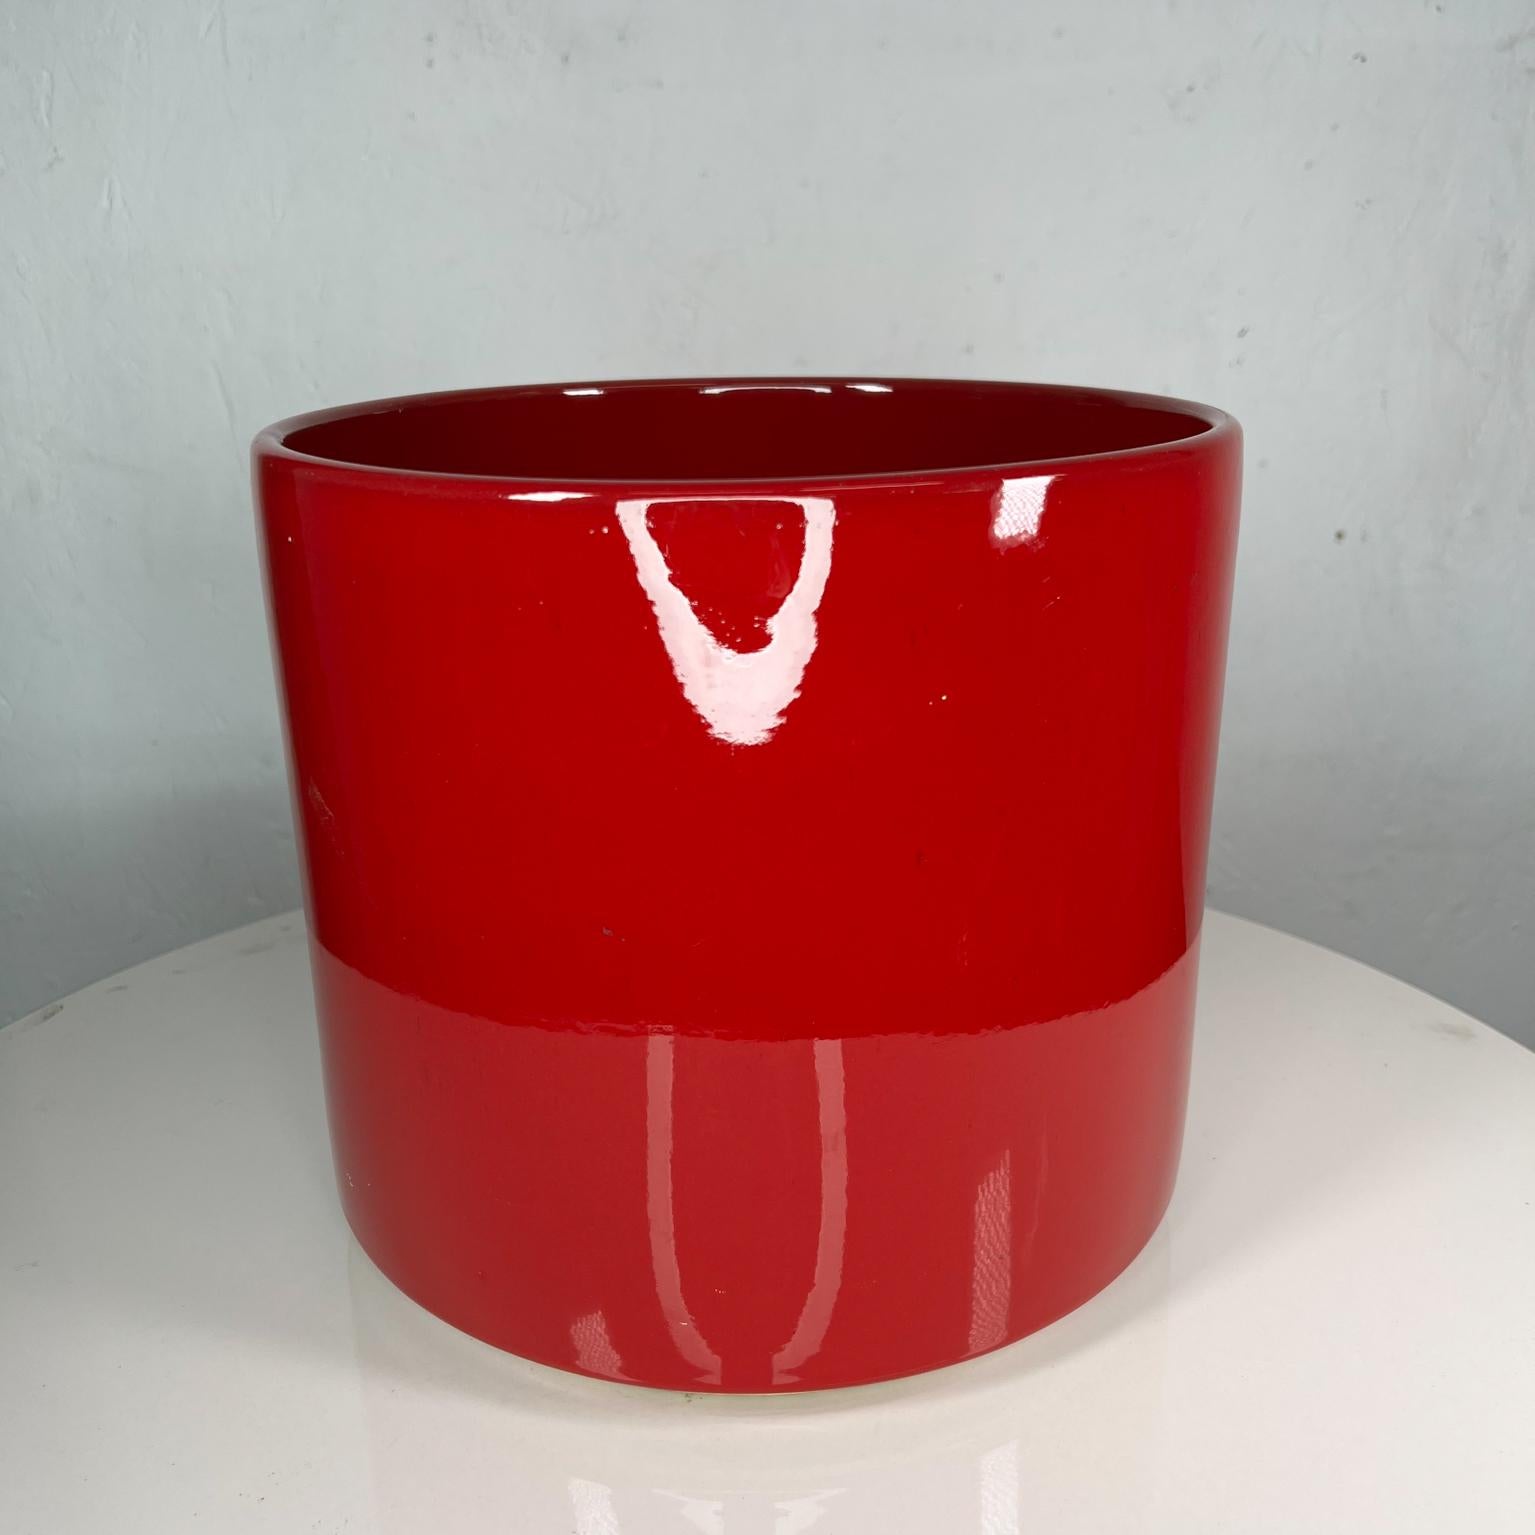 1960s Fabulous red Gainey Modern planter Architectural pottery California
Measures: 10 diameter x 9 tall
Maker stamped Gainey Ceramics La Verne Ca
Original preowned unrestored vintage condition
See images provided.
  